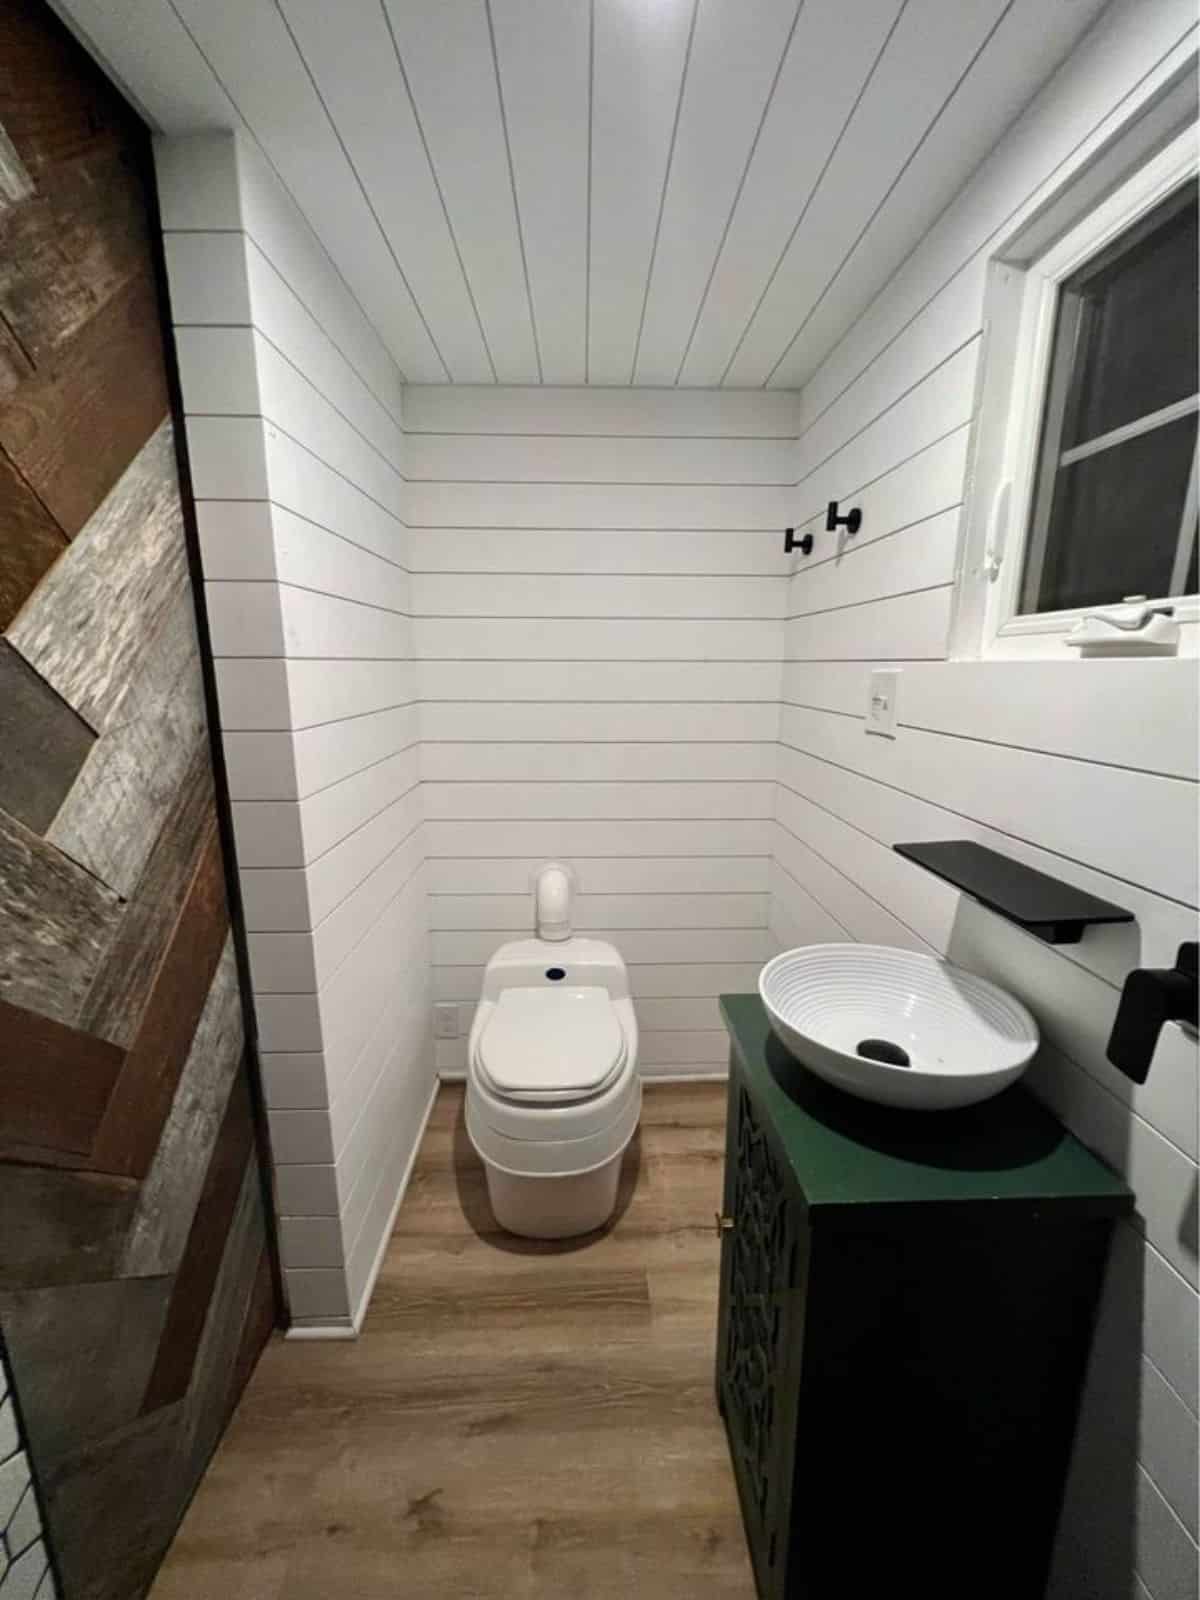 Sink with vanity and toilet of 22’ Luxury Tiny House